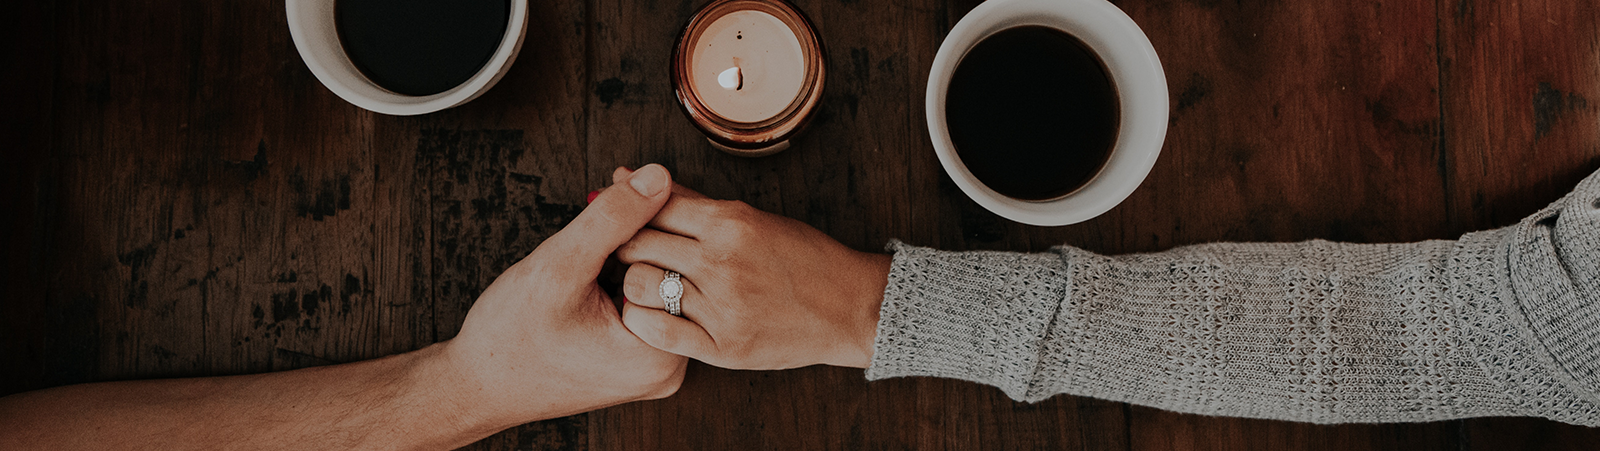 Marriage Counseling in Milford, CT—Marriage Counselors and Therapists